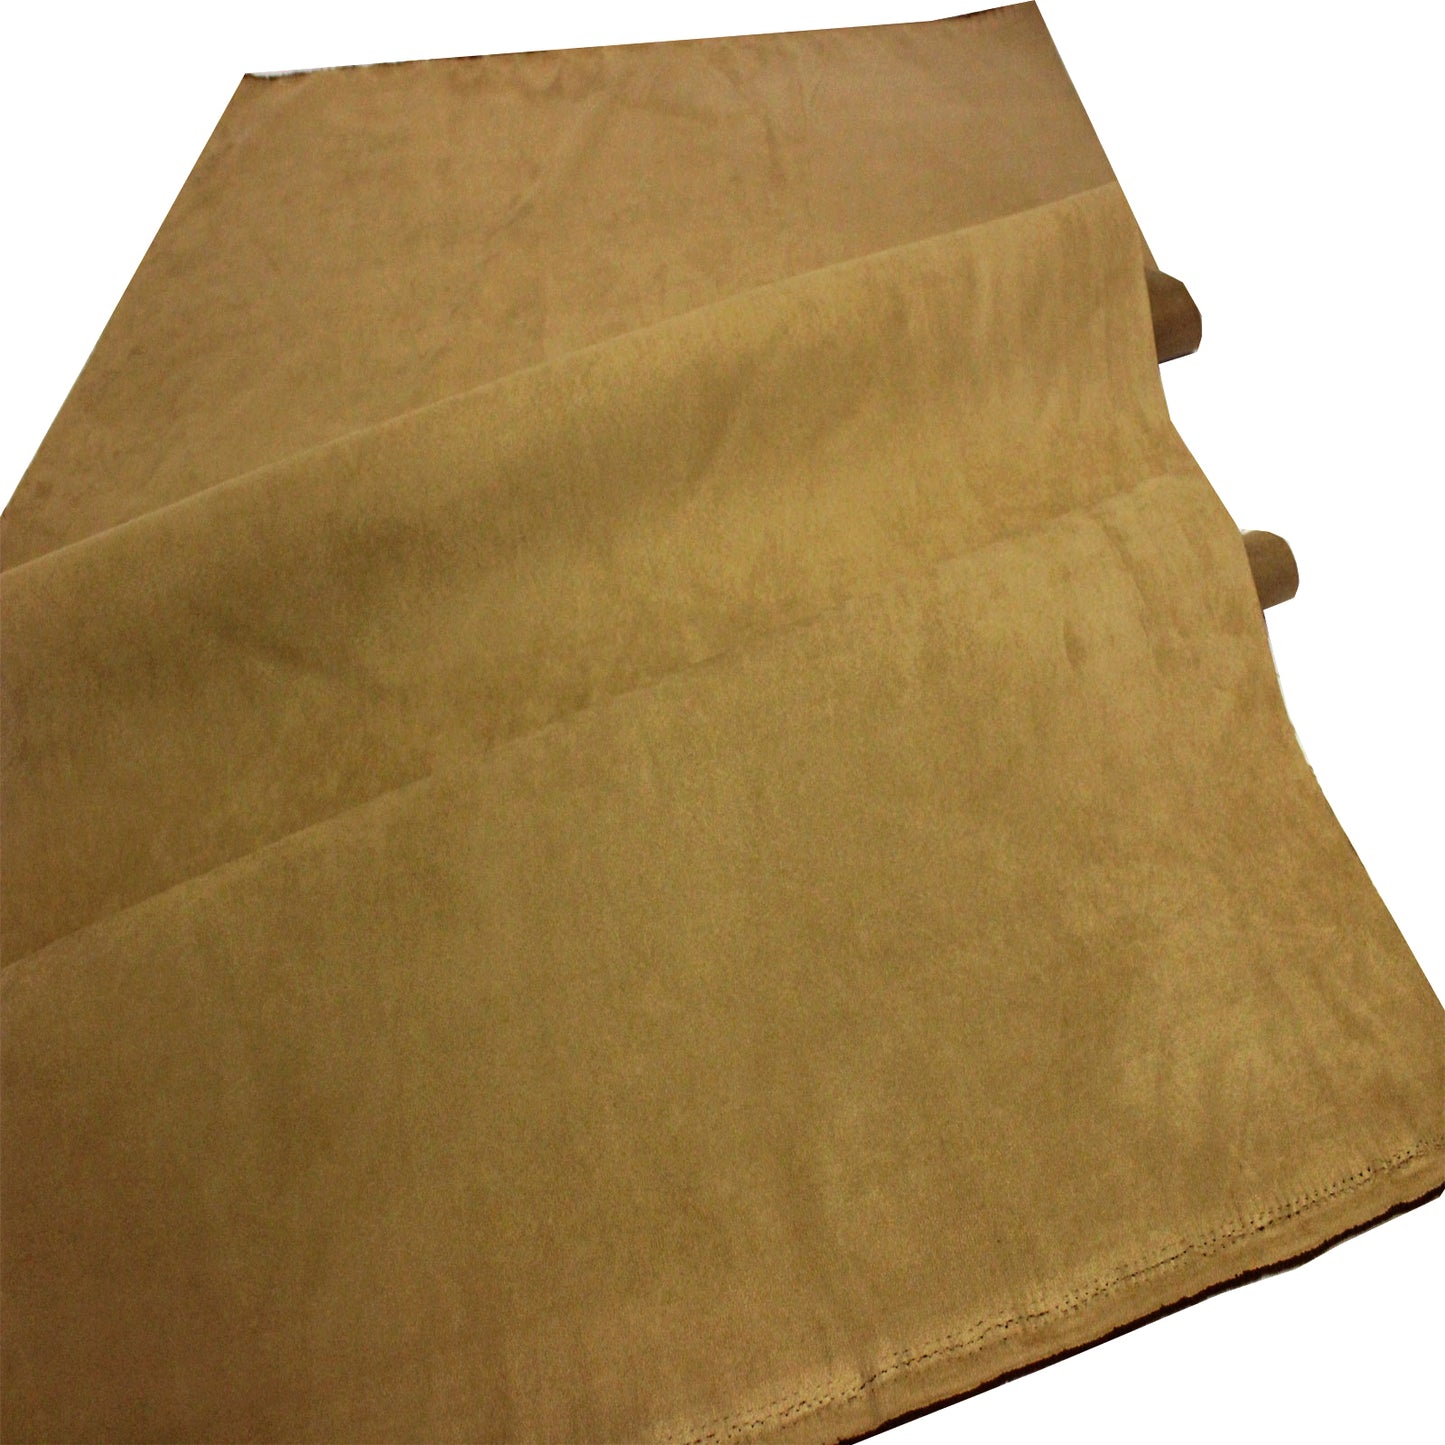 Mybecca Luxurious Microsuede Fabric for Upholstery and Drapery 58" width